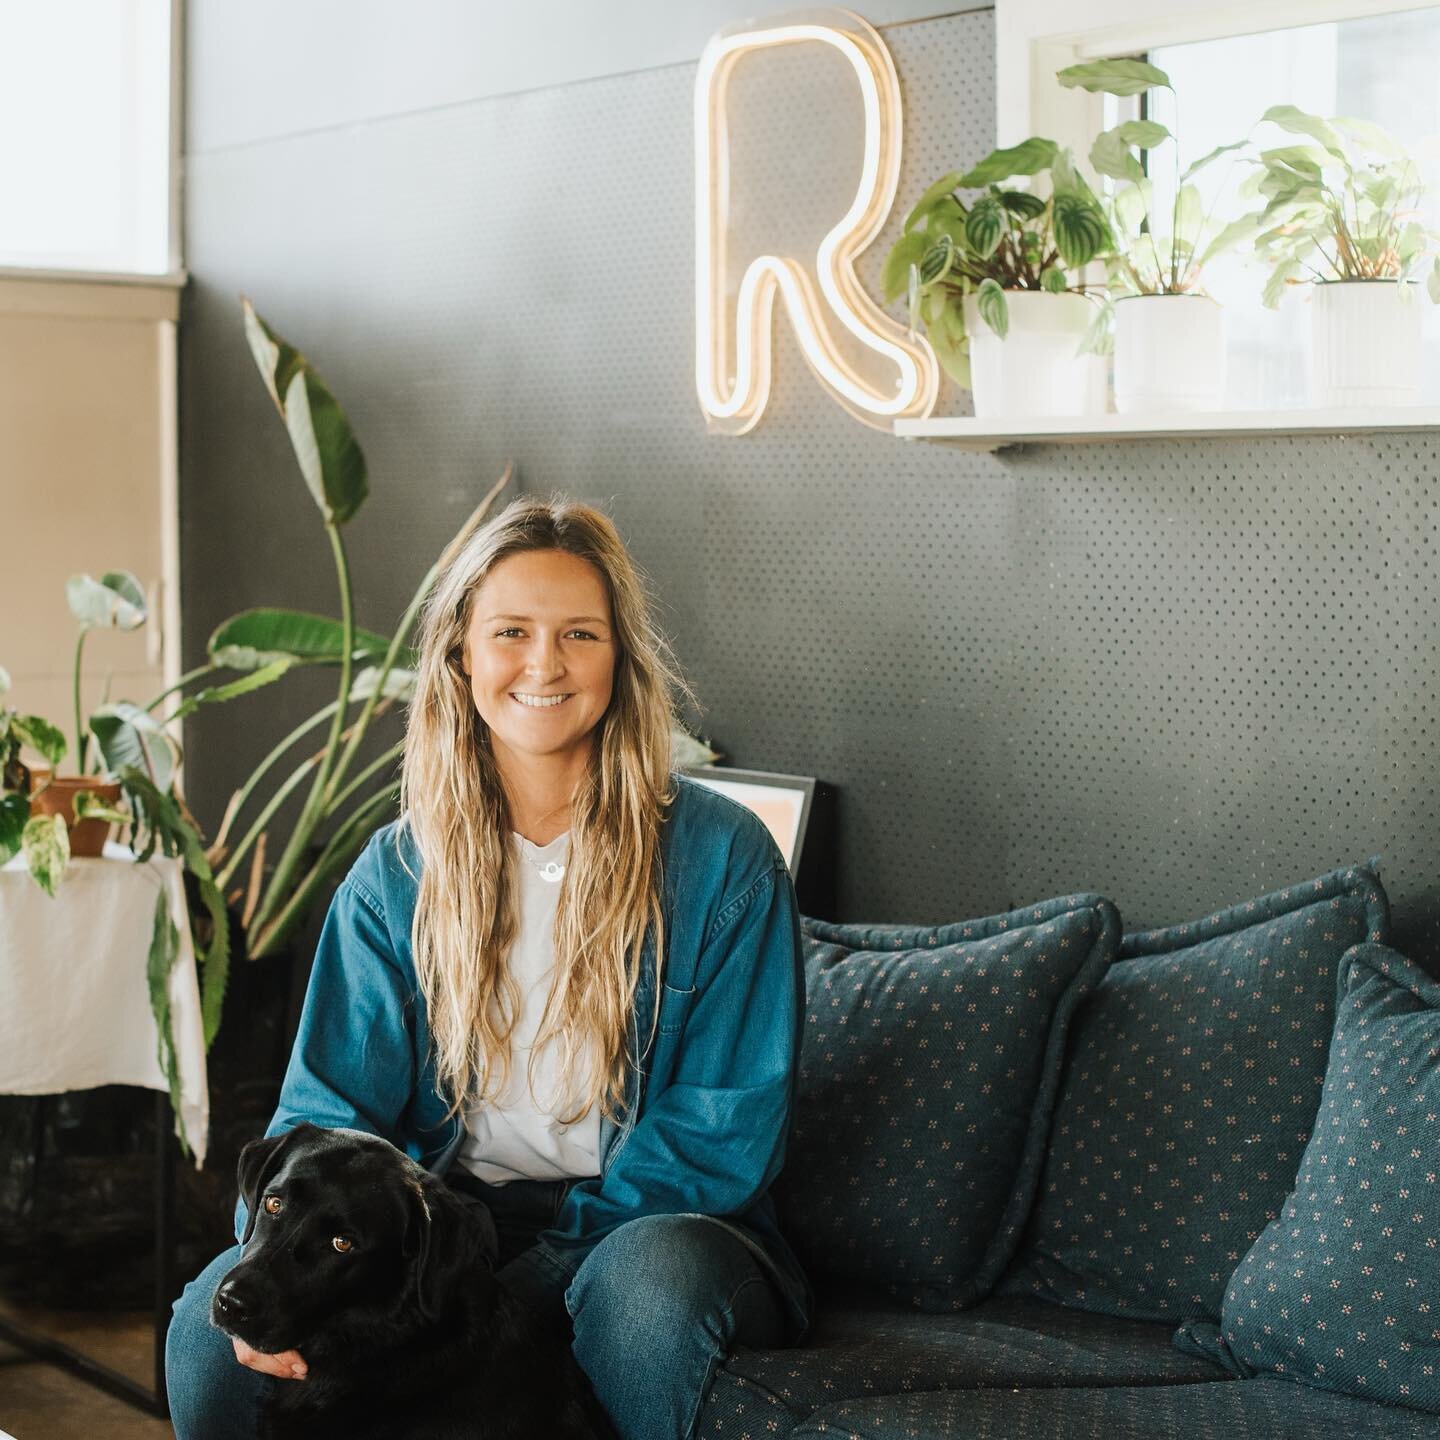 Heeeeey! I&rsquo;m Jess, the creative behind Ranger Studio. We had a cute little write up in the local magazine so thought it would be the perfect time for an introduction.

I grew up in Titirangi Akl, running around the bush and down to the local be